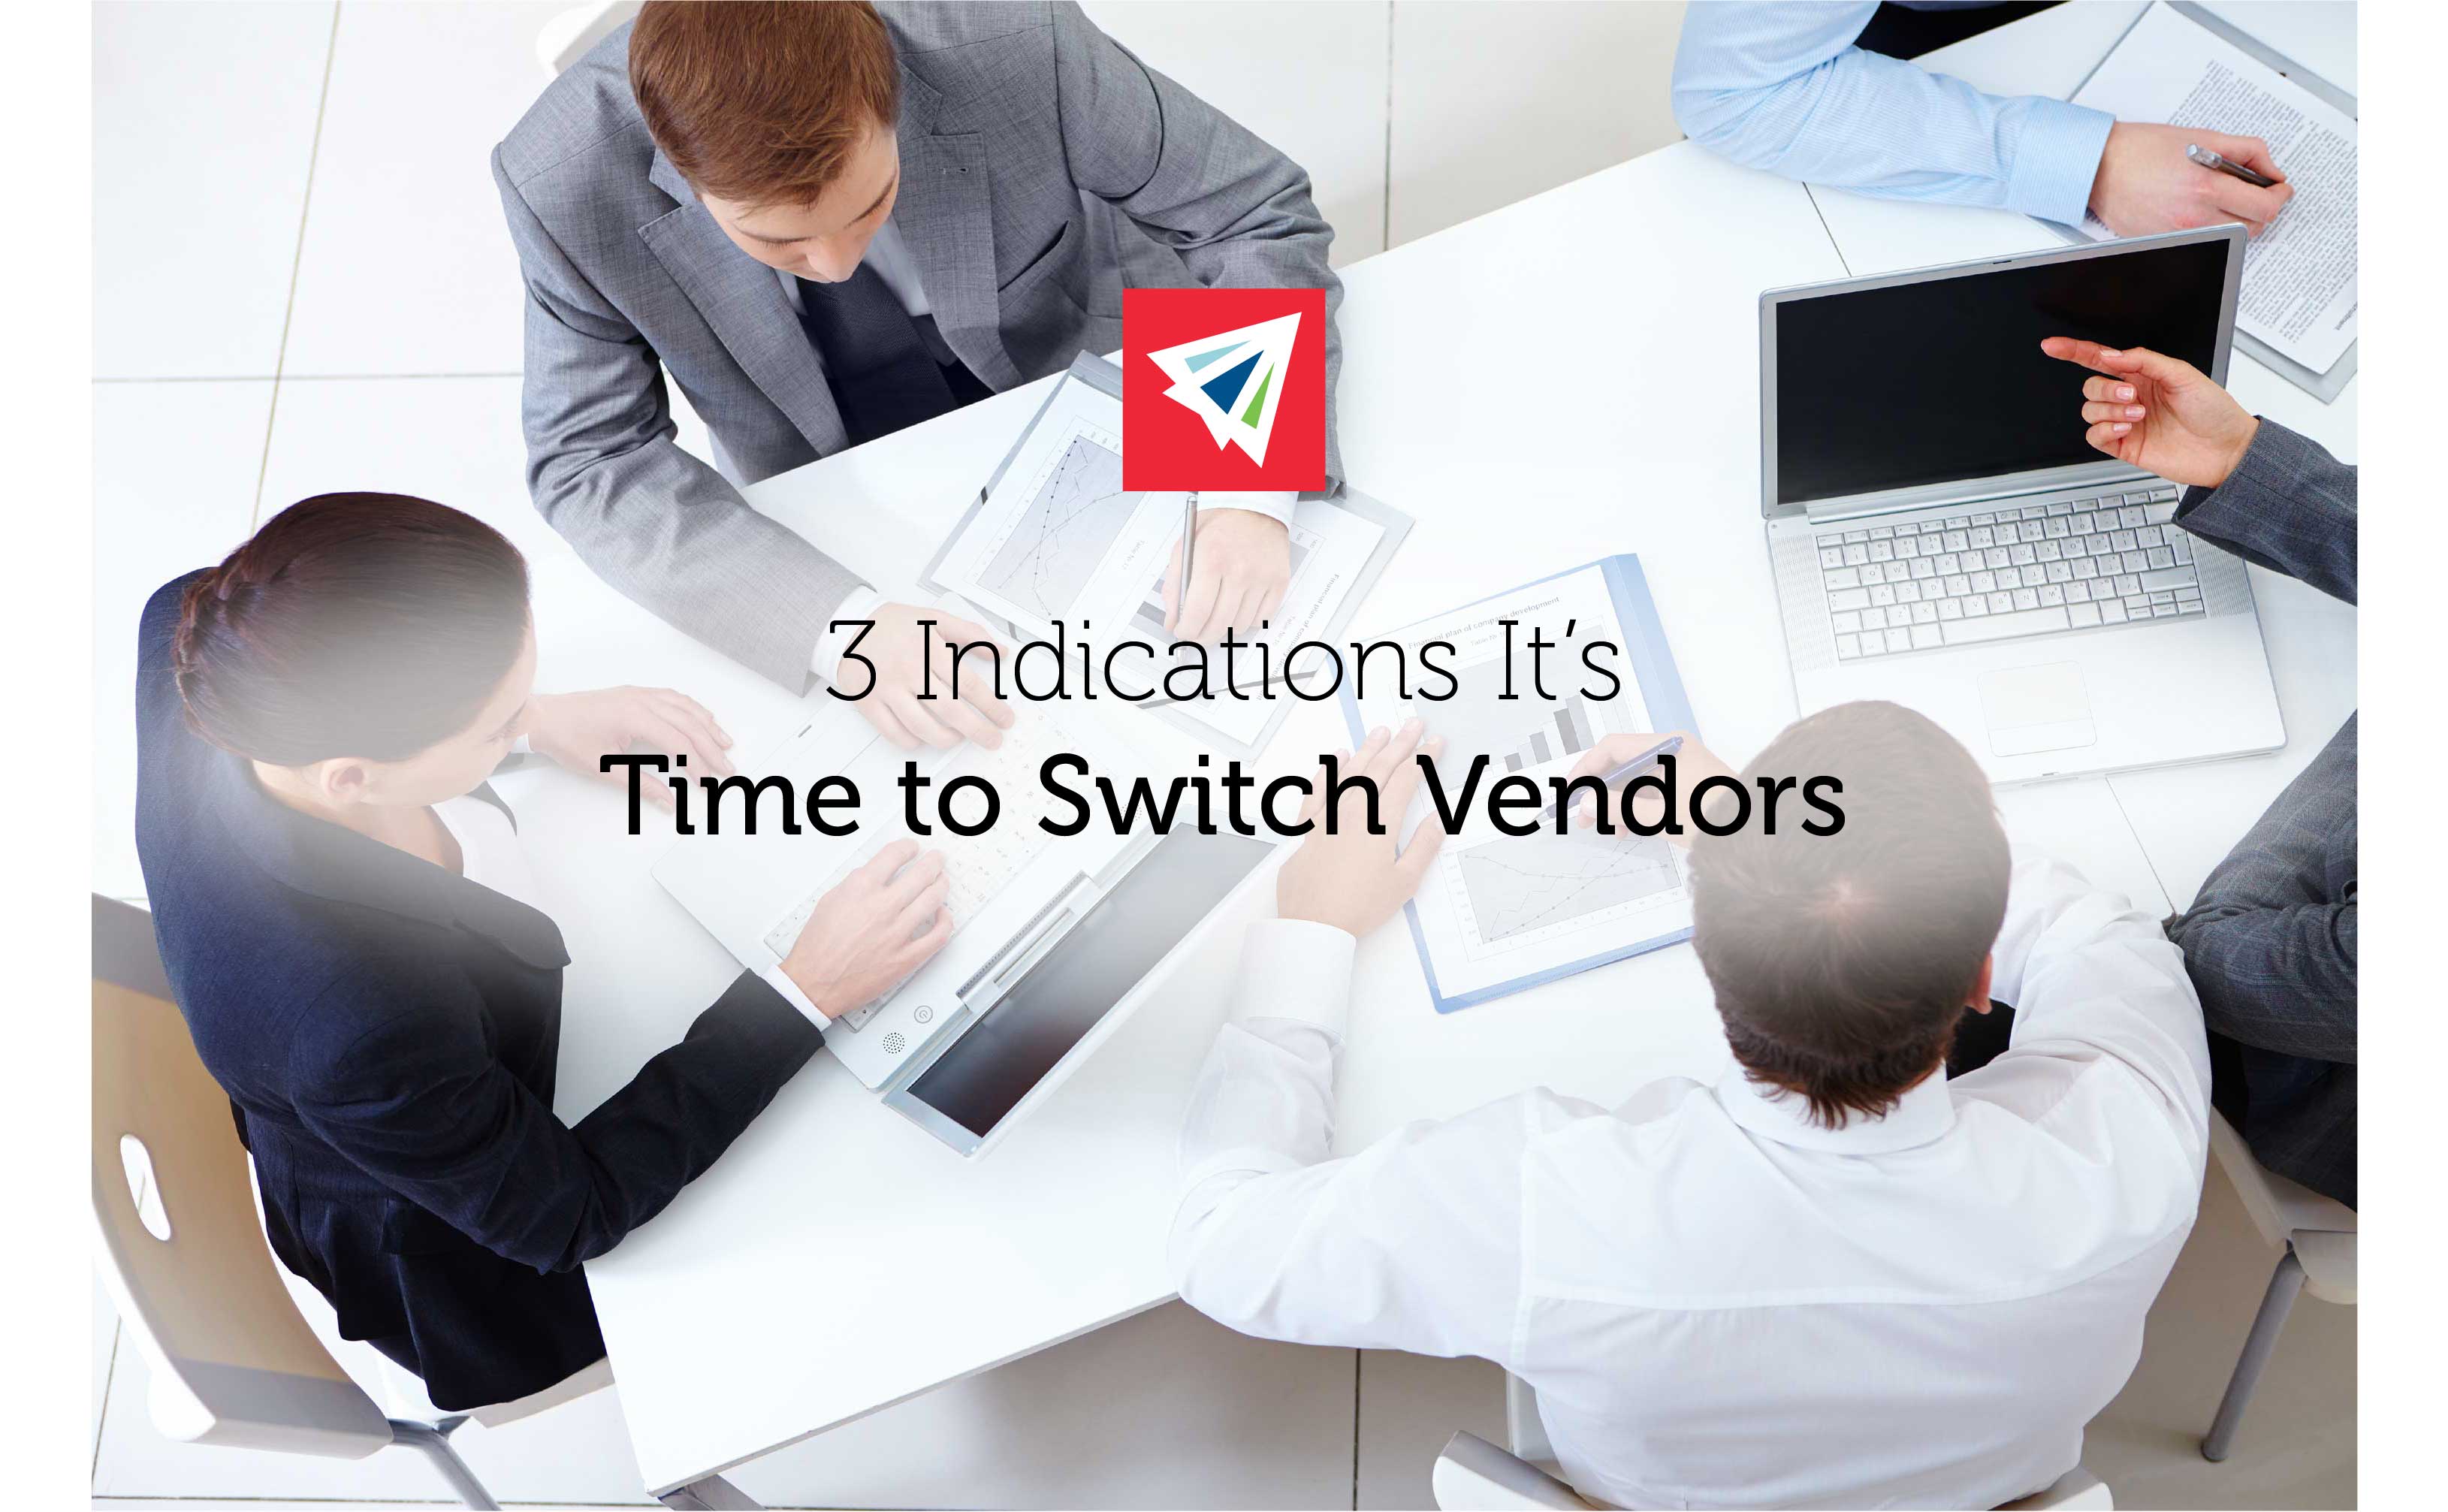 3 Indications It's Time to Switch Vendors